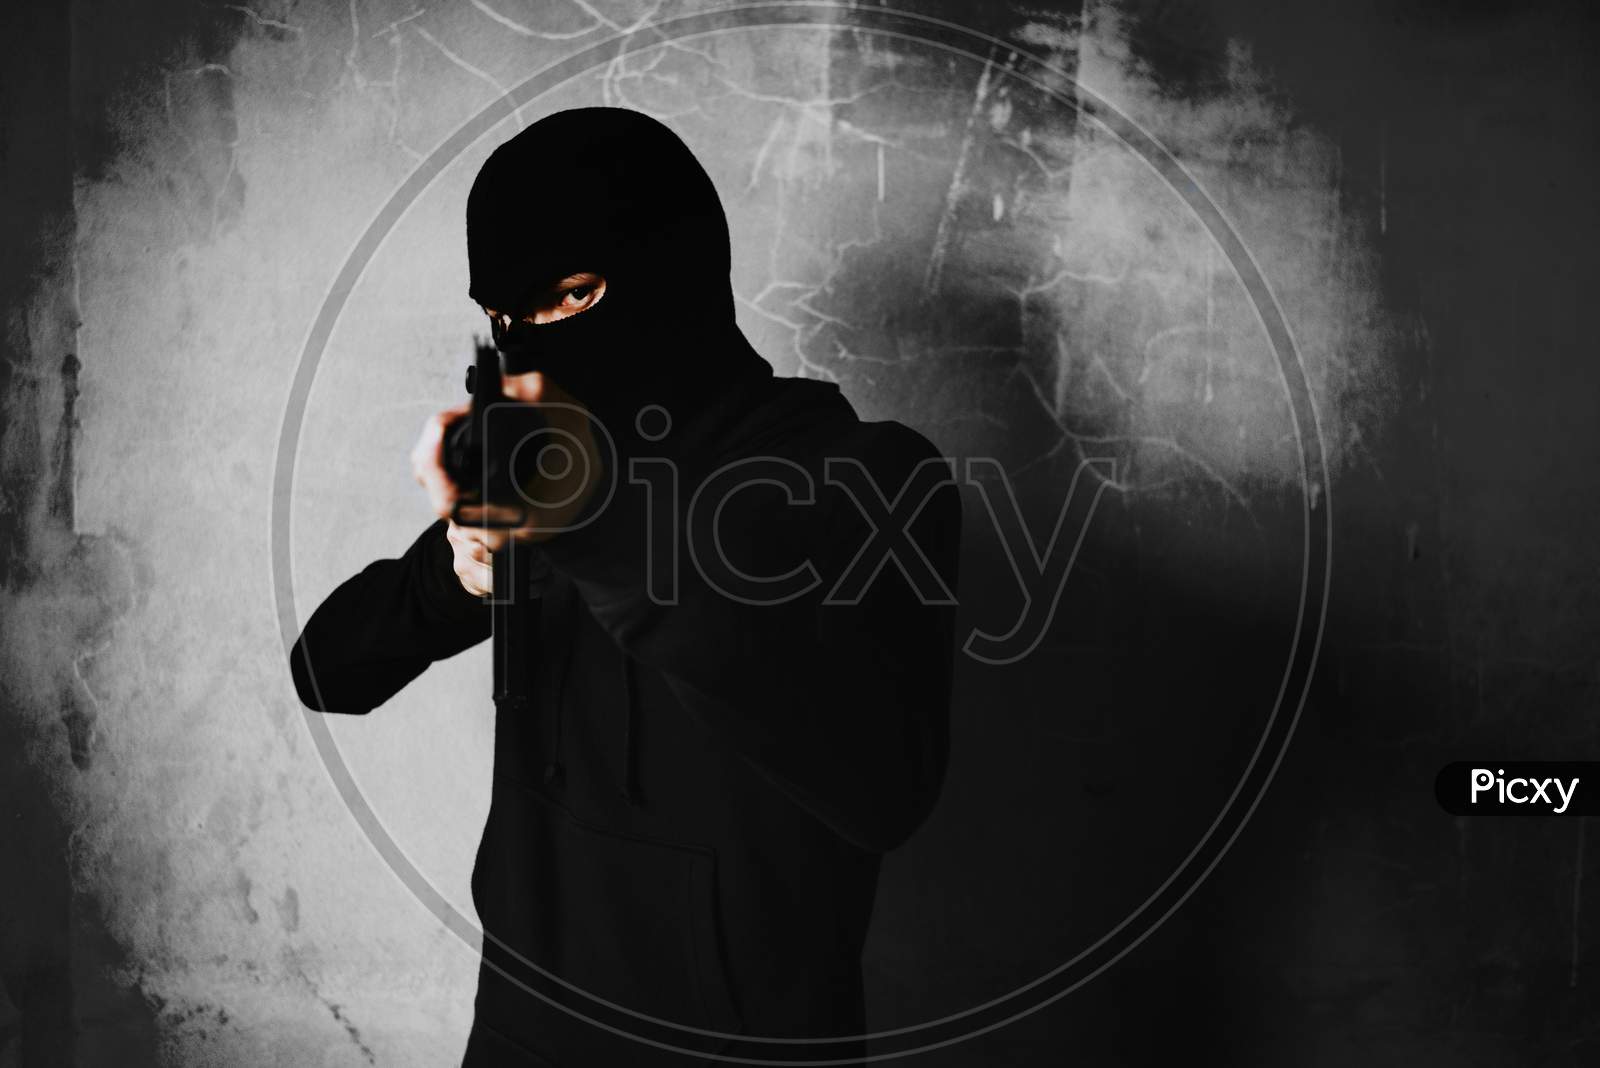 Terrorist Shooting With His War Gun Weapon With Grunge Room Wall Background. Criminal And Dangerous Illegal People Concept. Terrorist And War Theme. Dark Tone And High Contrast Use